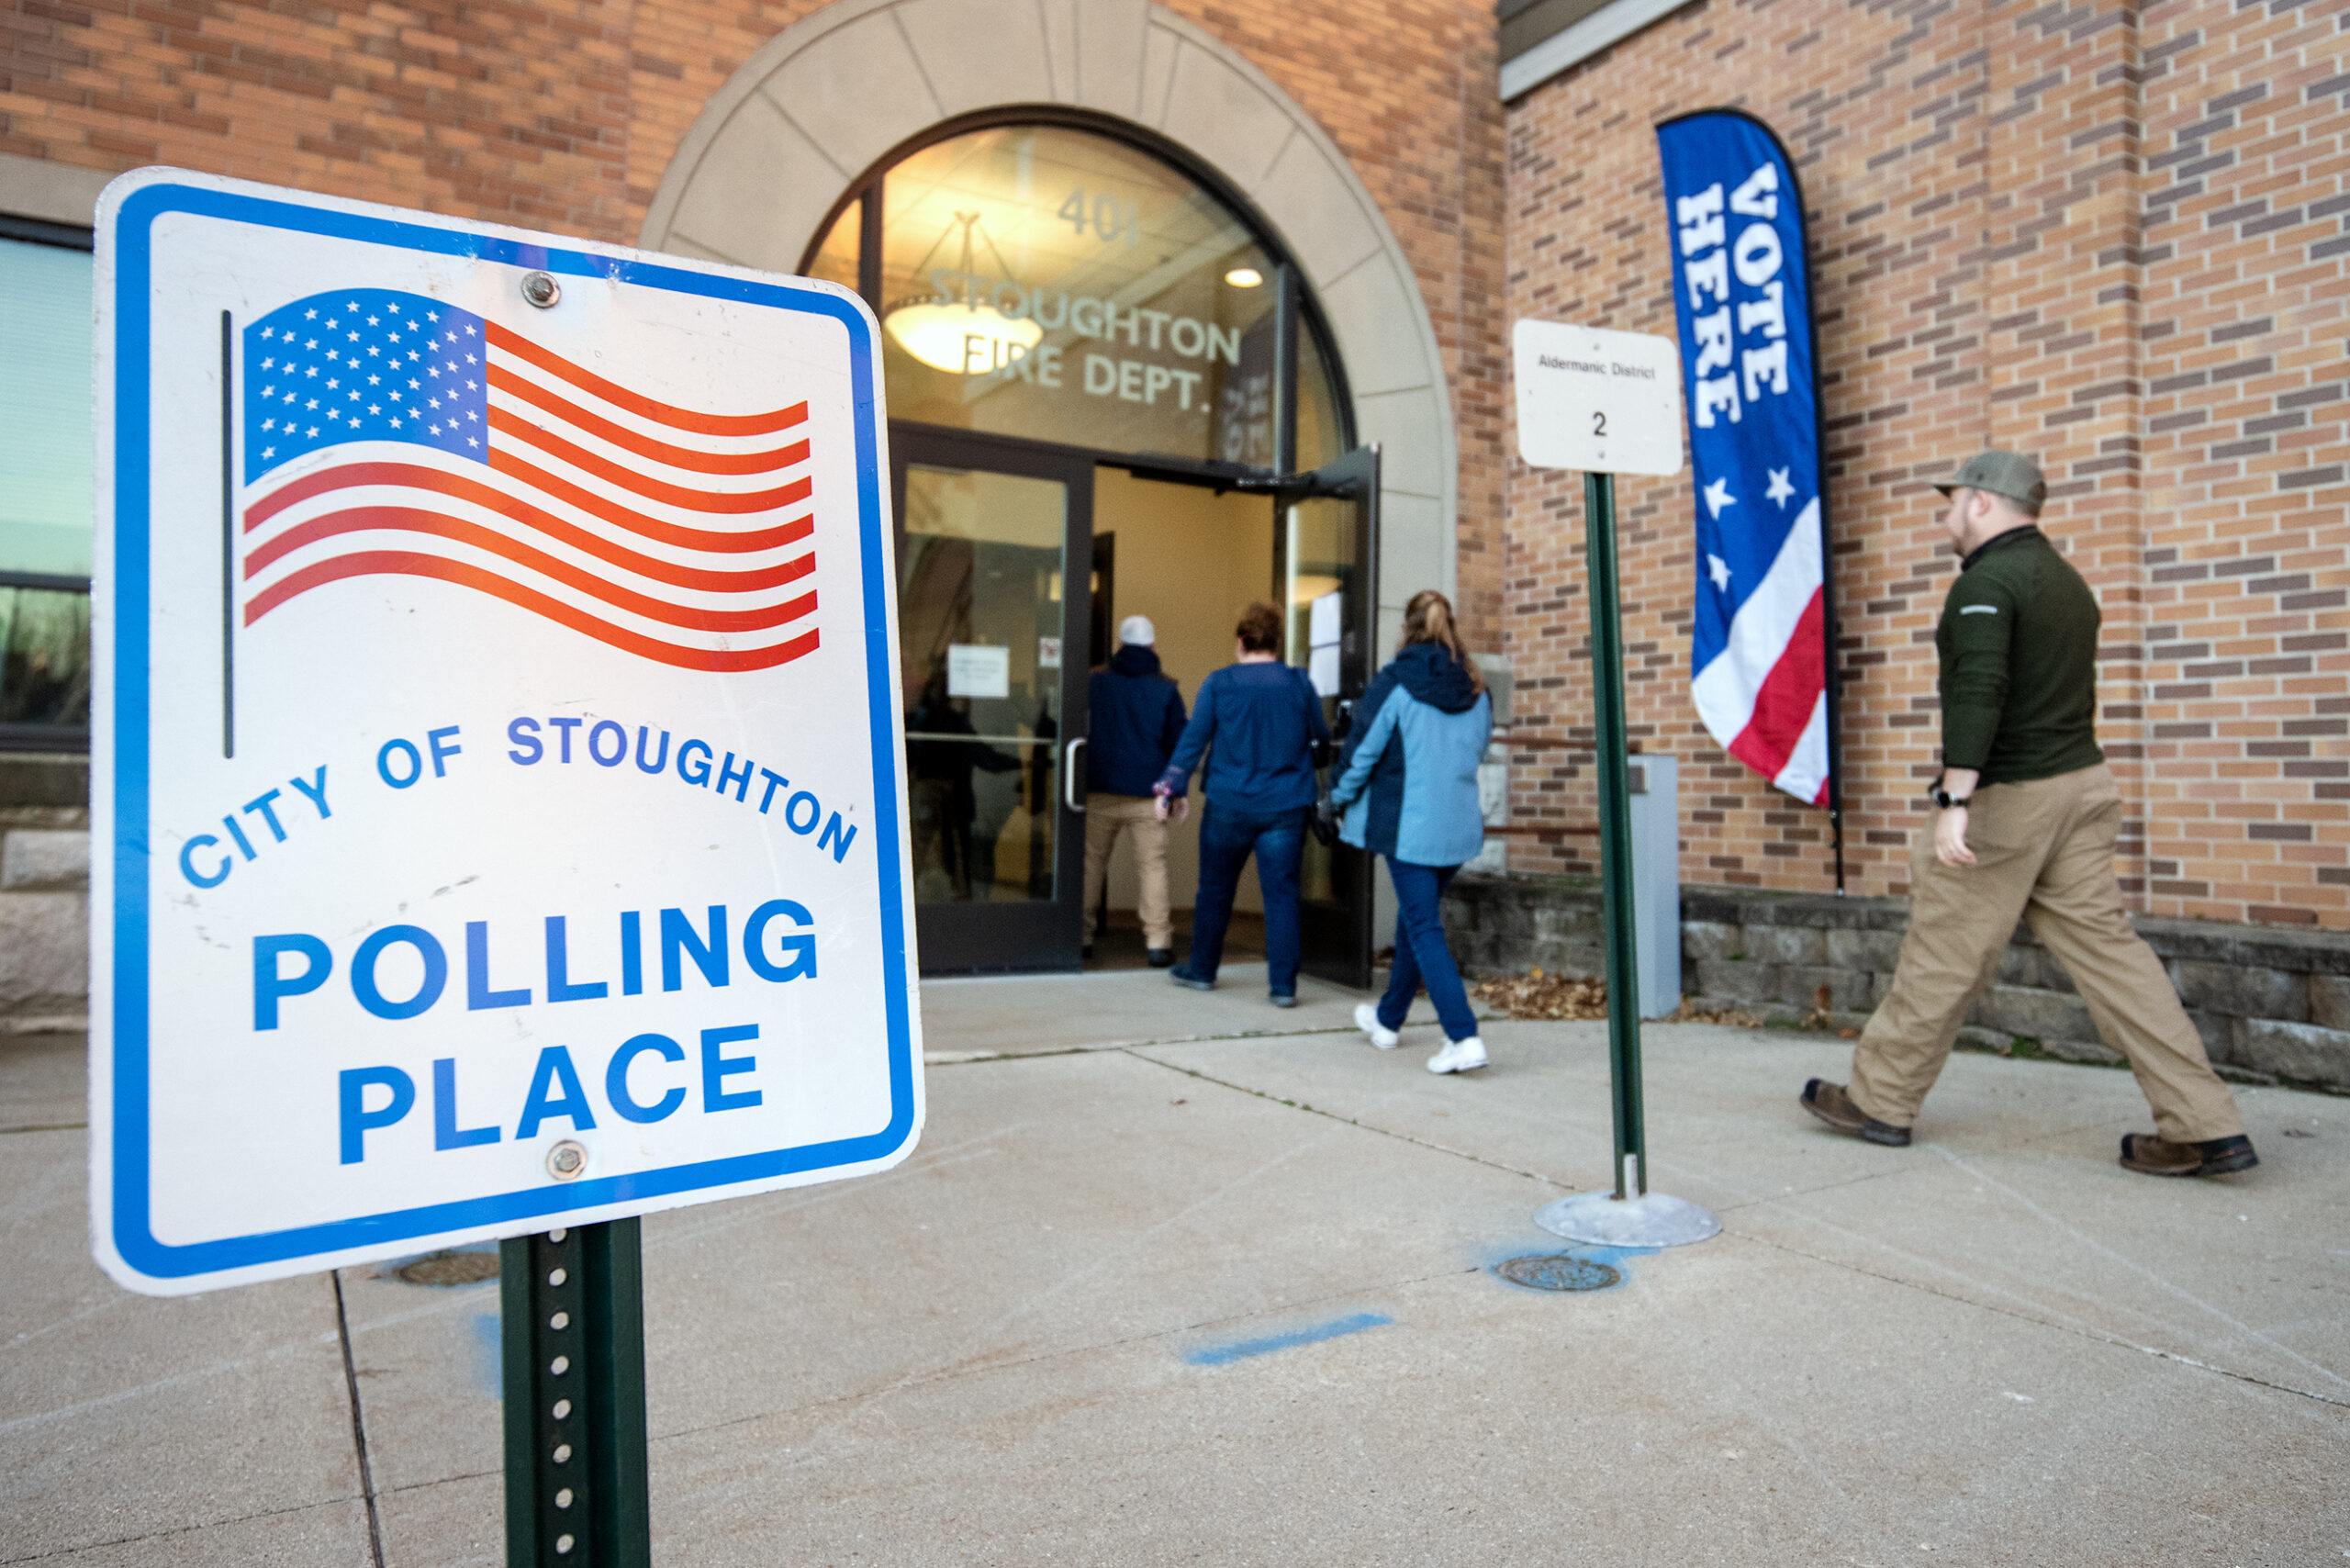 A line of voters walk past a sign that says "City of Stoughton Polling Place"